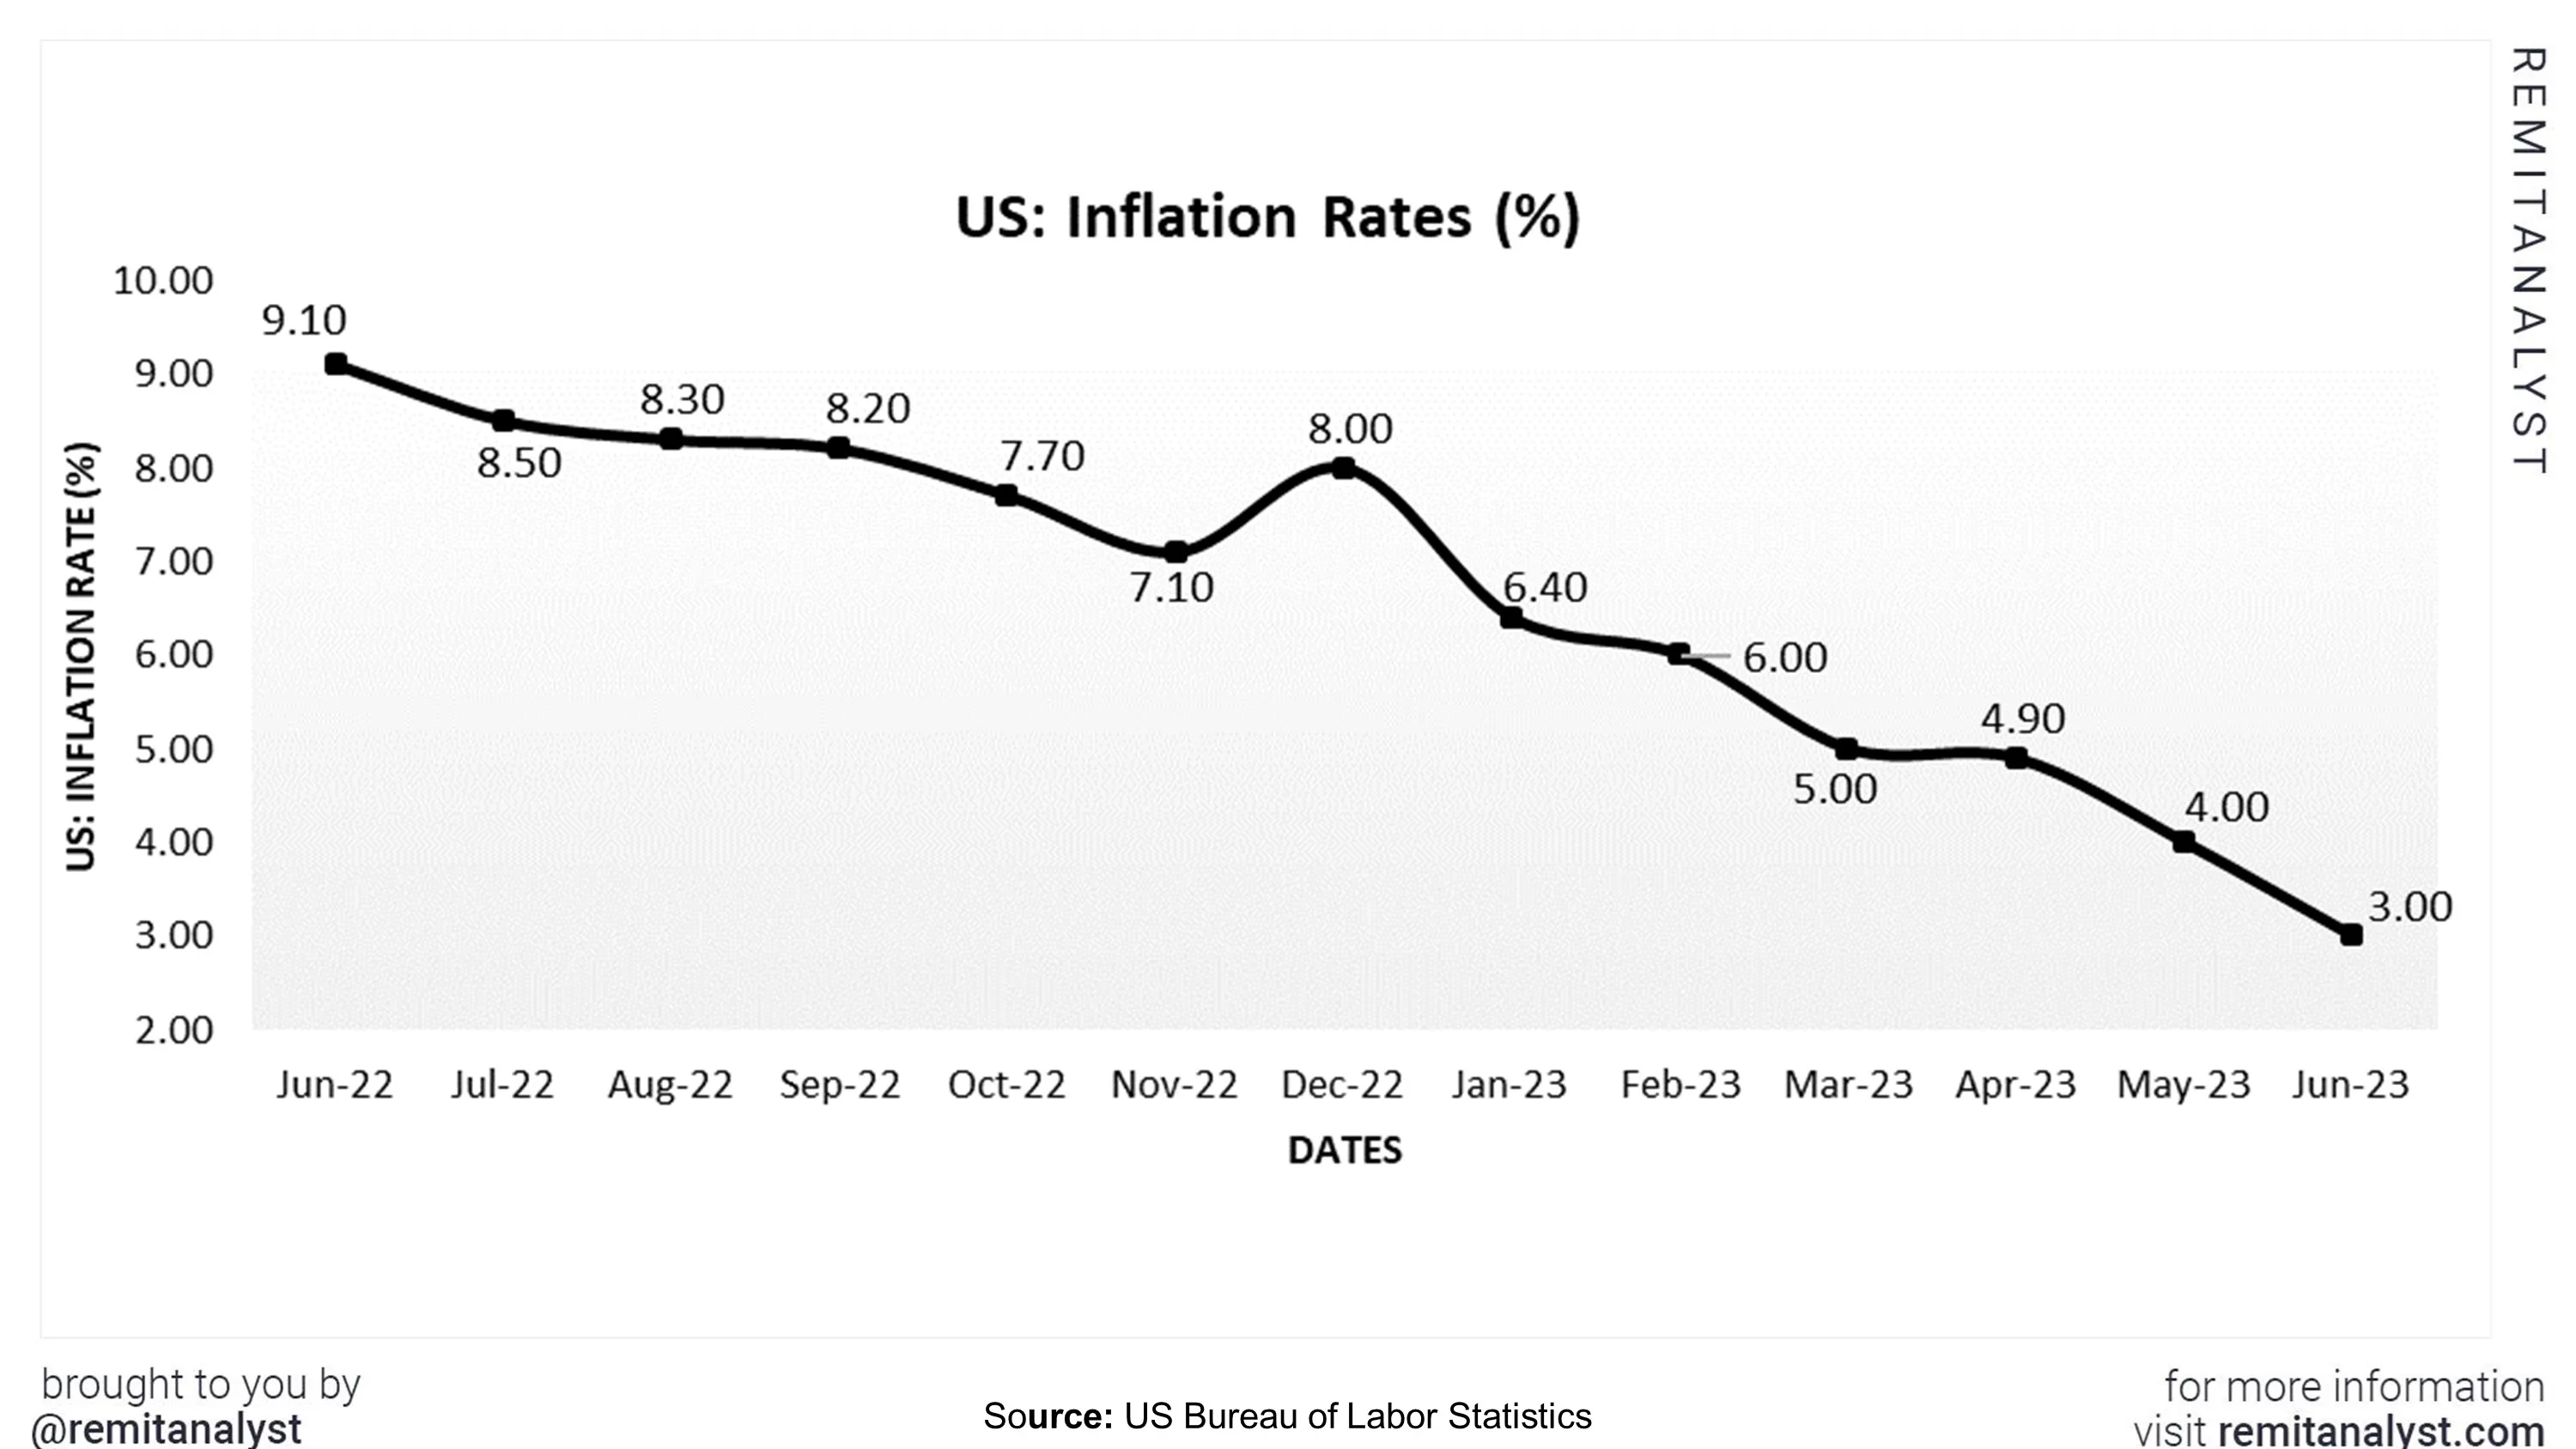 inflation-rates-in-us-from-jun-2022-to-jun-2023